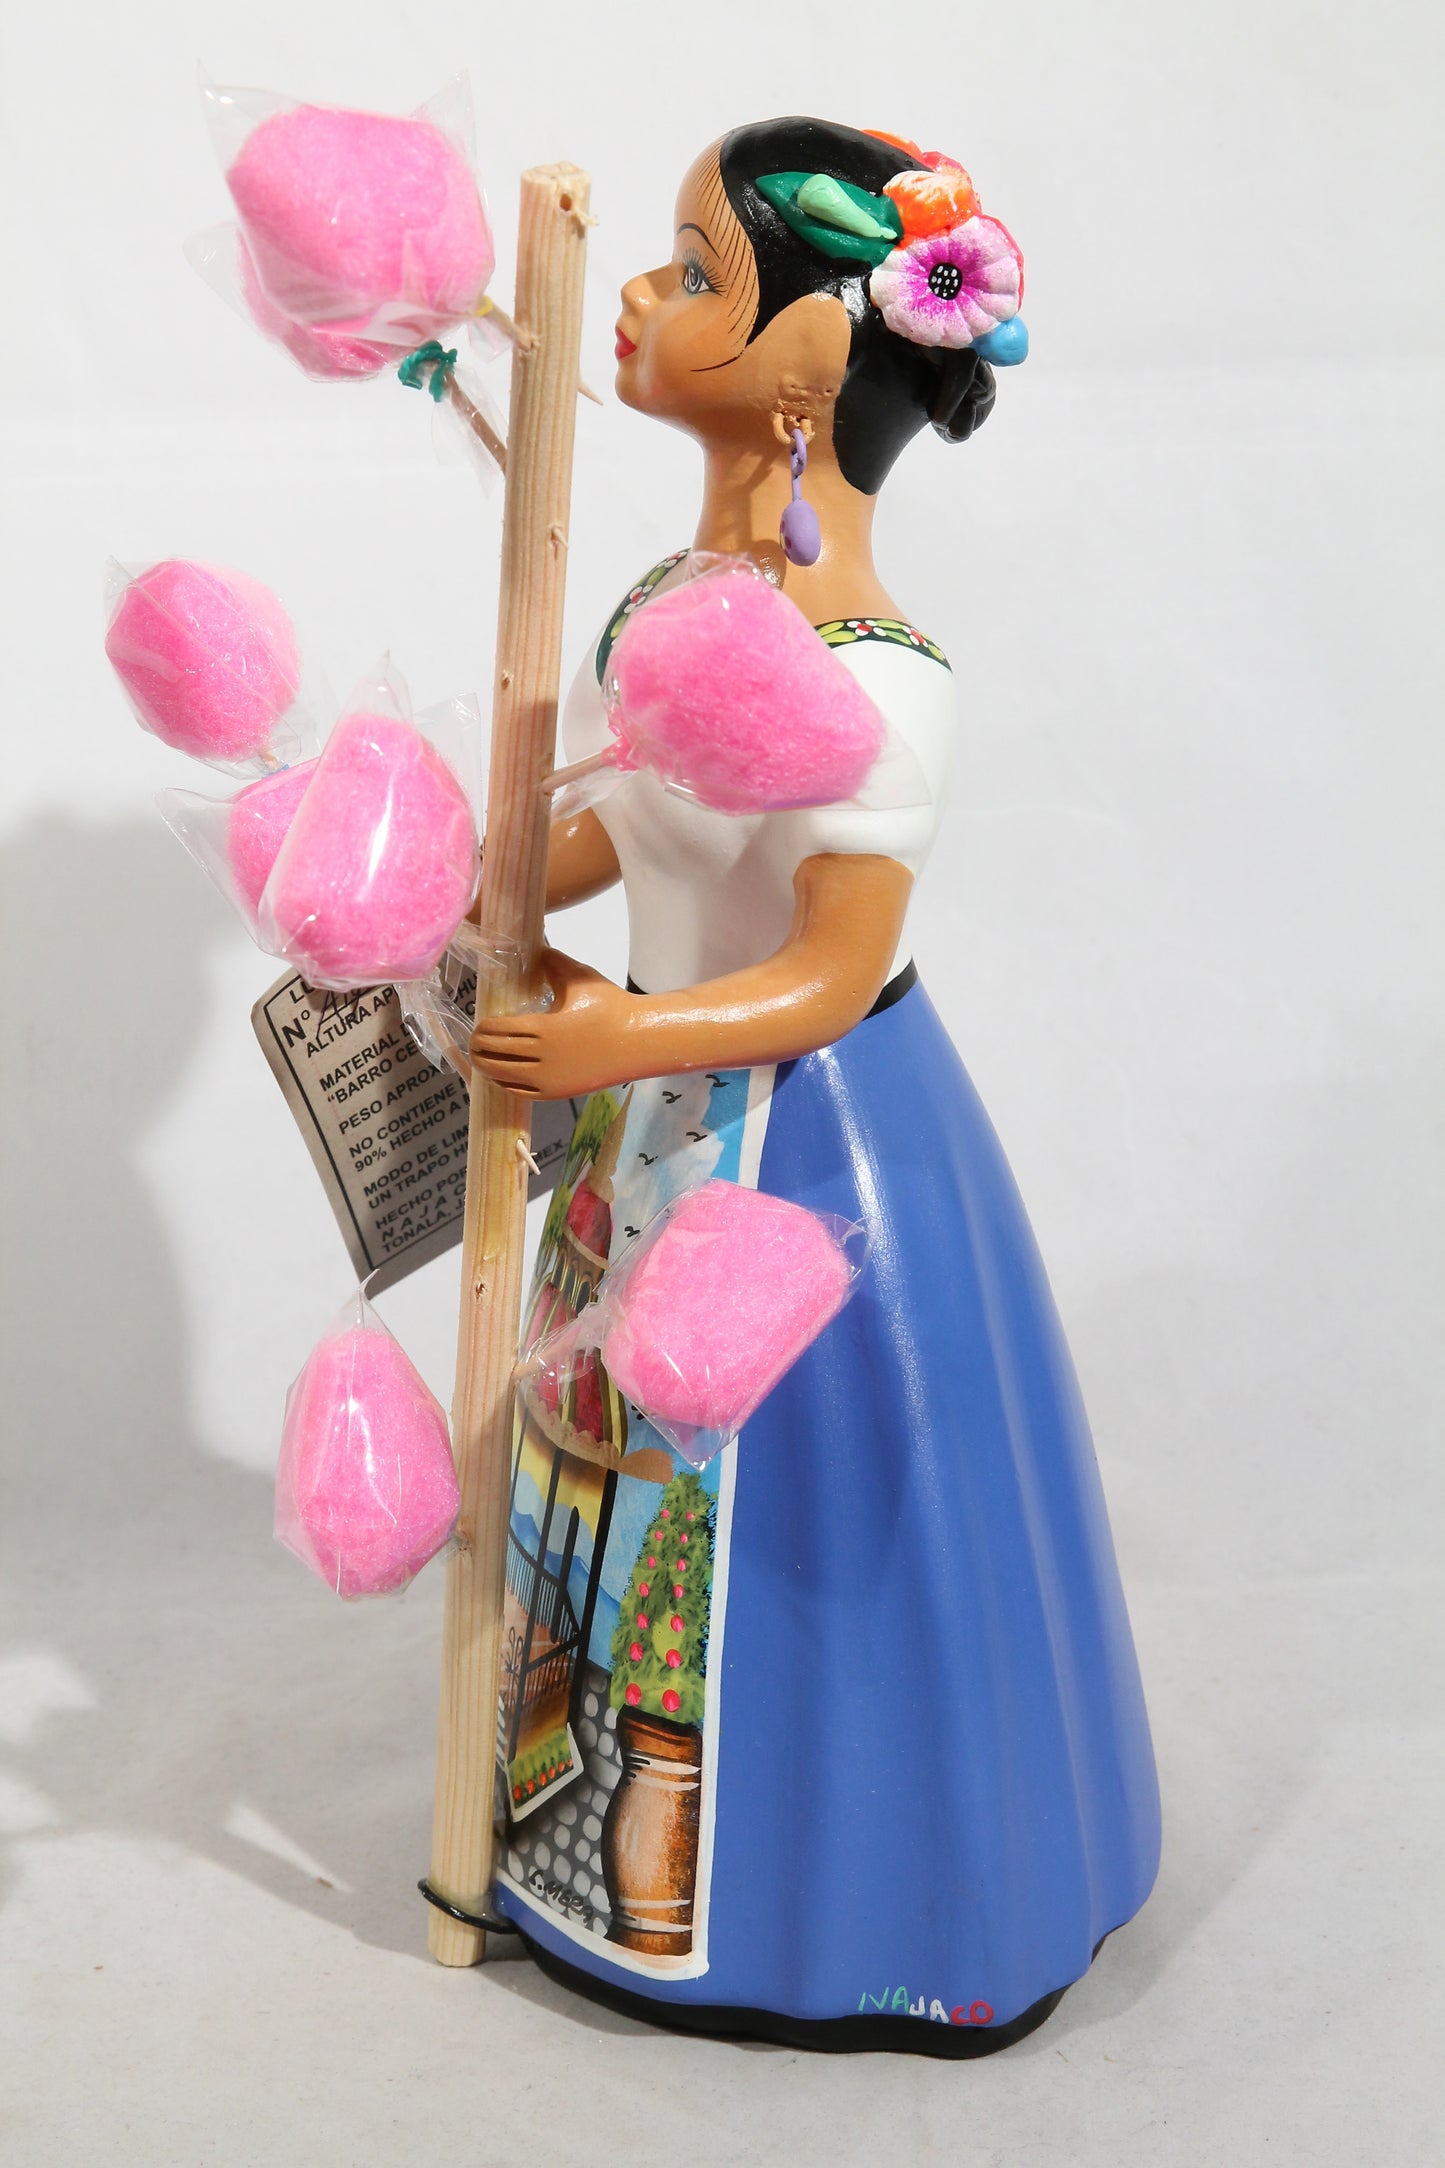 Lupita Najaco Figurine Cotton Candy Seller Mexican New Blue